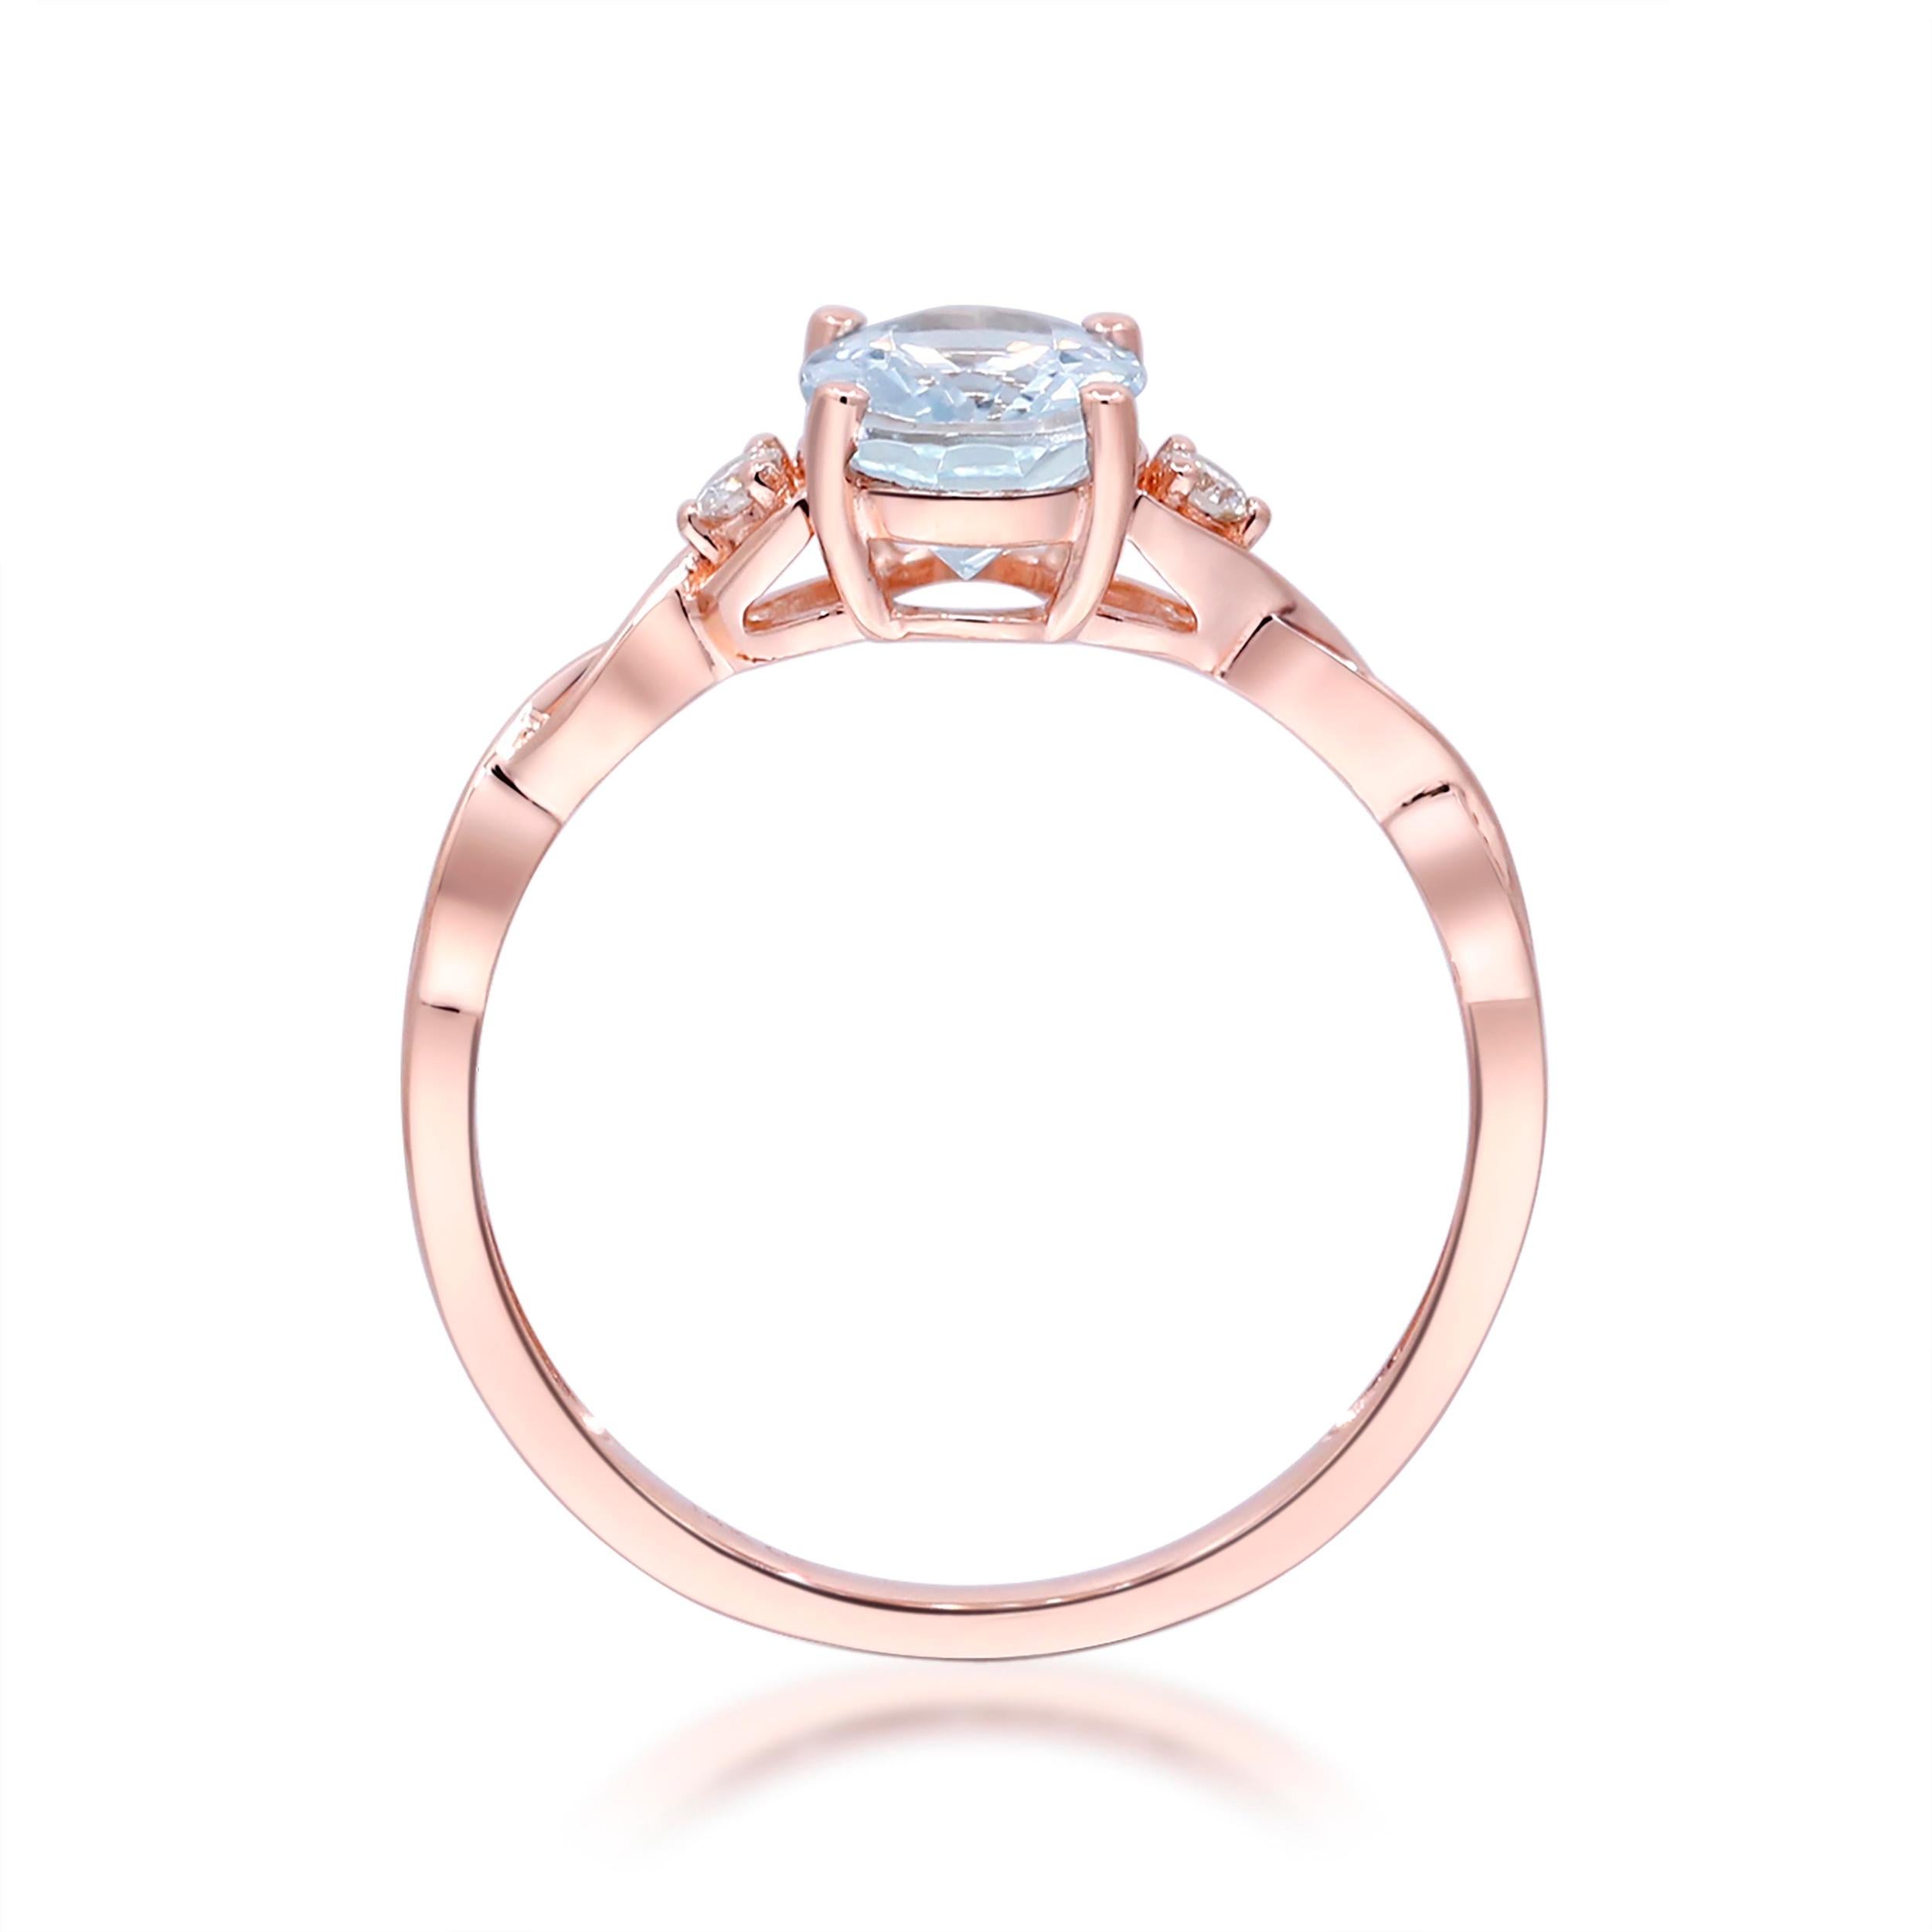 Oval Cut 1.09 Carat Oval-Cut Aquamarine with Diamond Accents 14K Rose Gold Ring For Sale